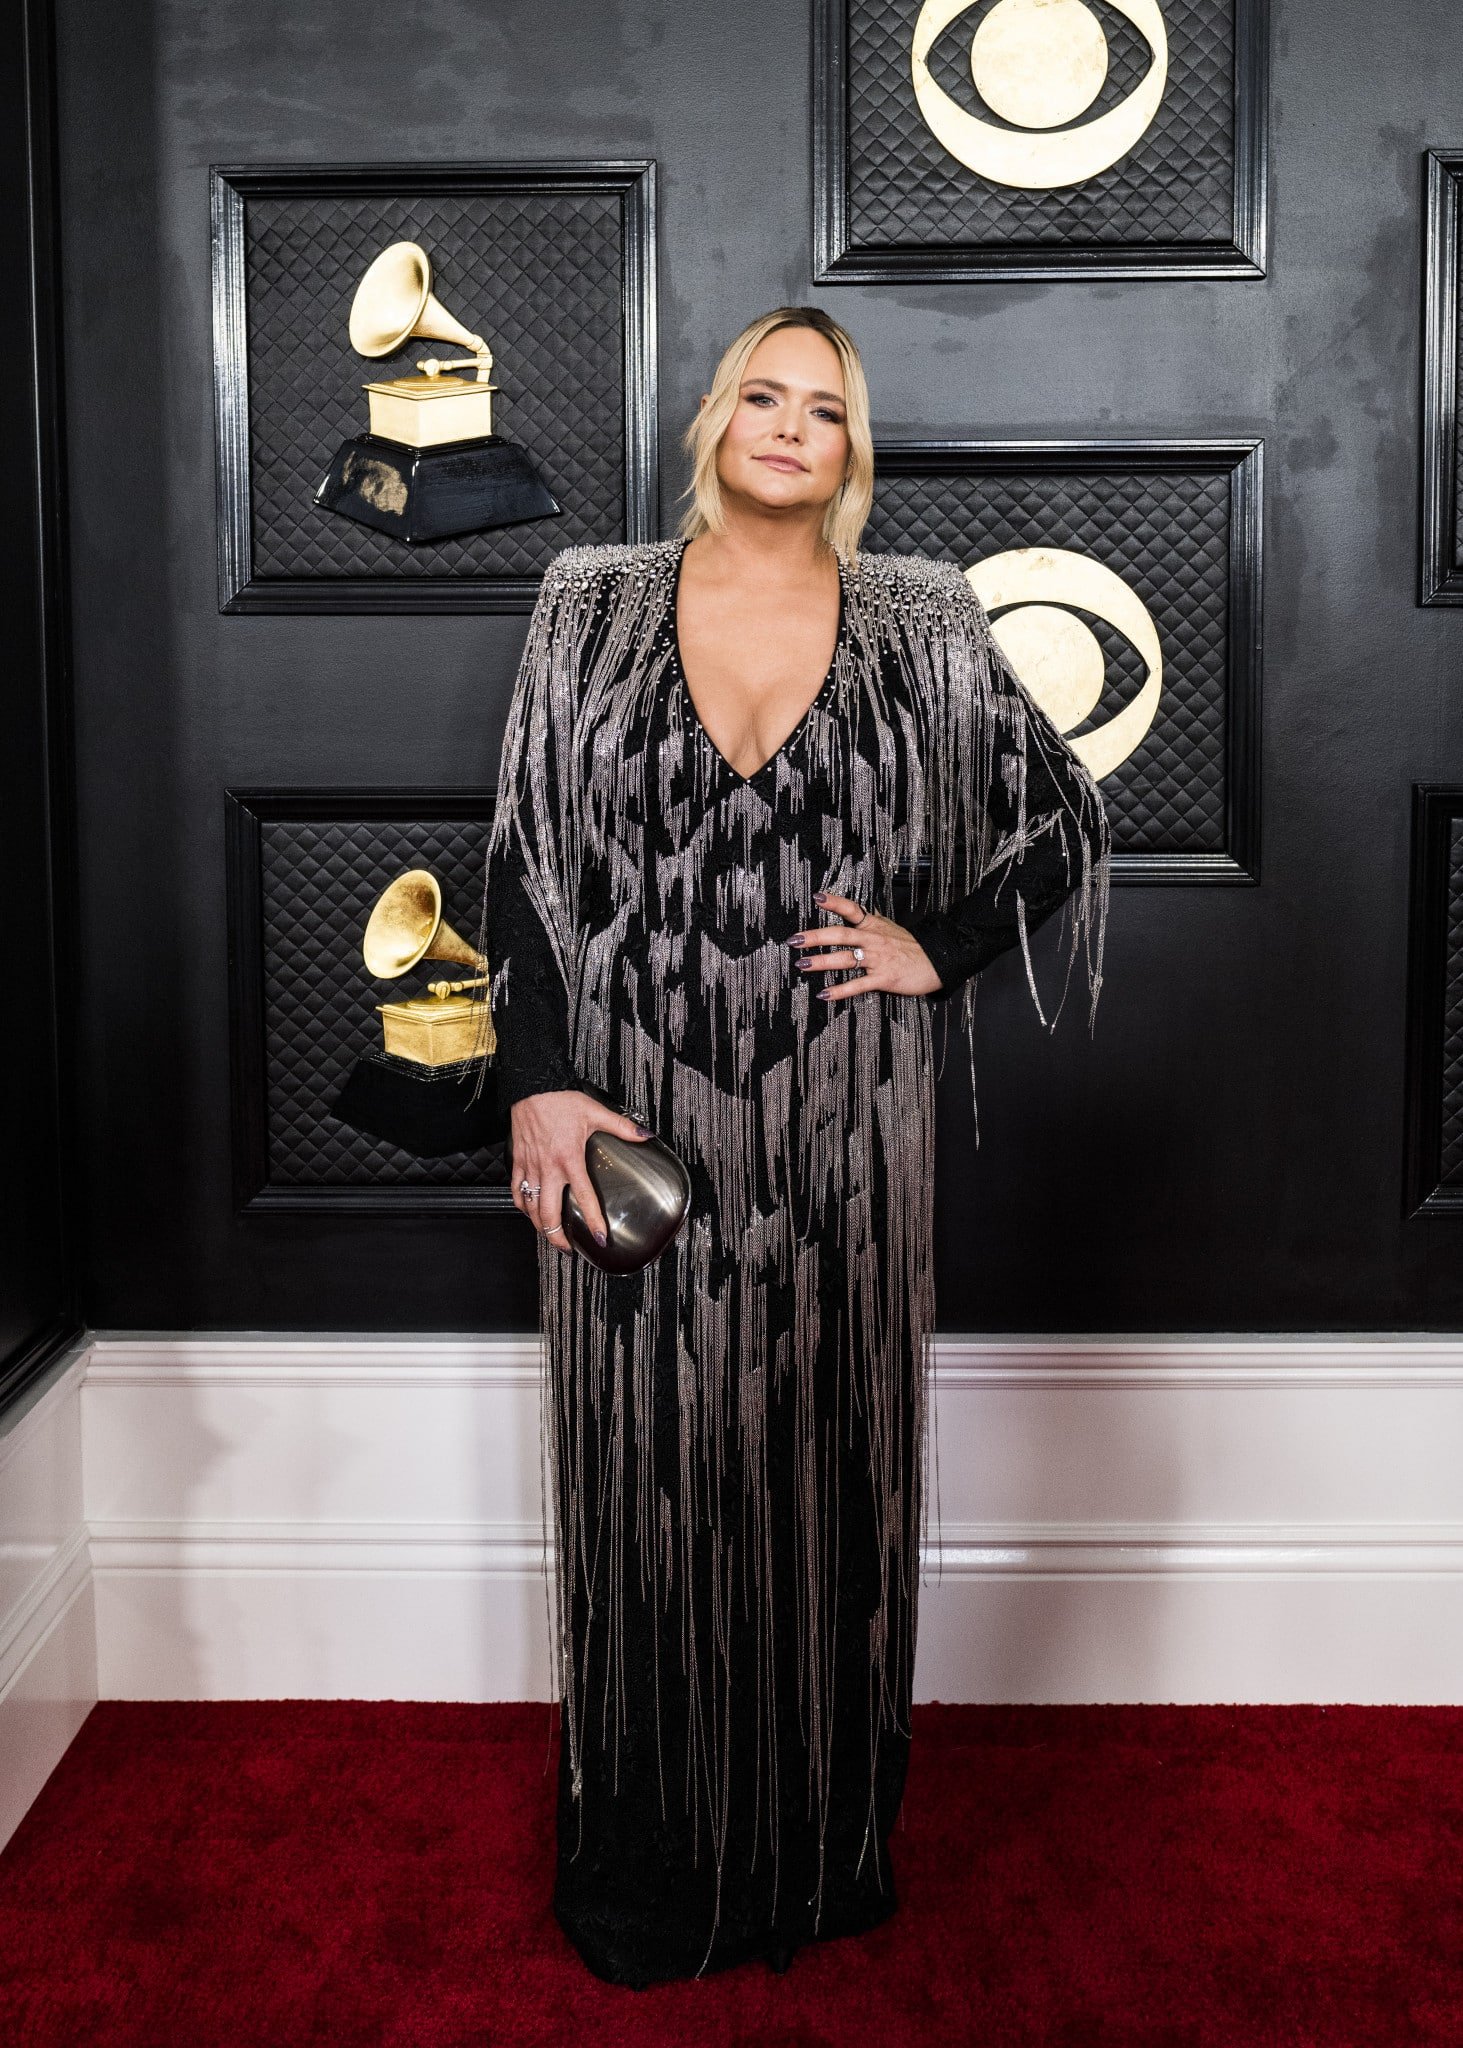 LOS ANGELES, CALIFORNIA - FEBRUARY 05: Miranda Lambert attends the 65th GRAMMY Awards on February 05, 2023 in Los Angeles, California. (Photo by John Shearer/Getty Images for The Recording Academy)